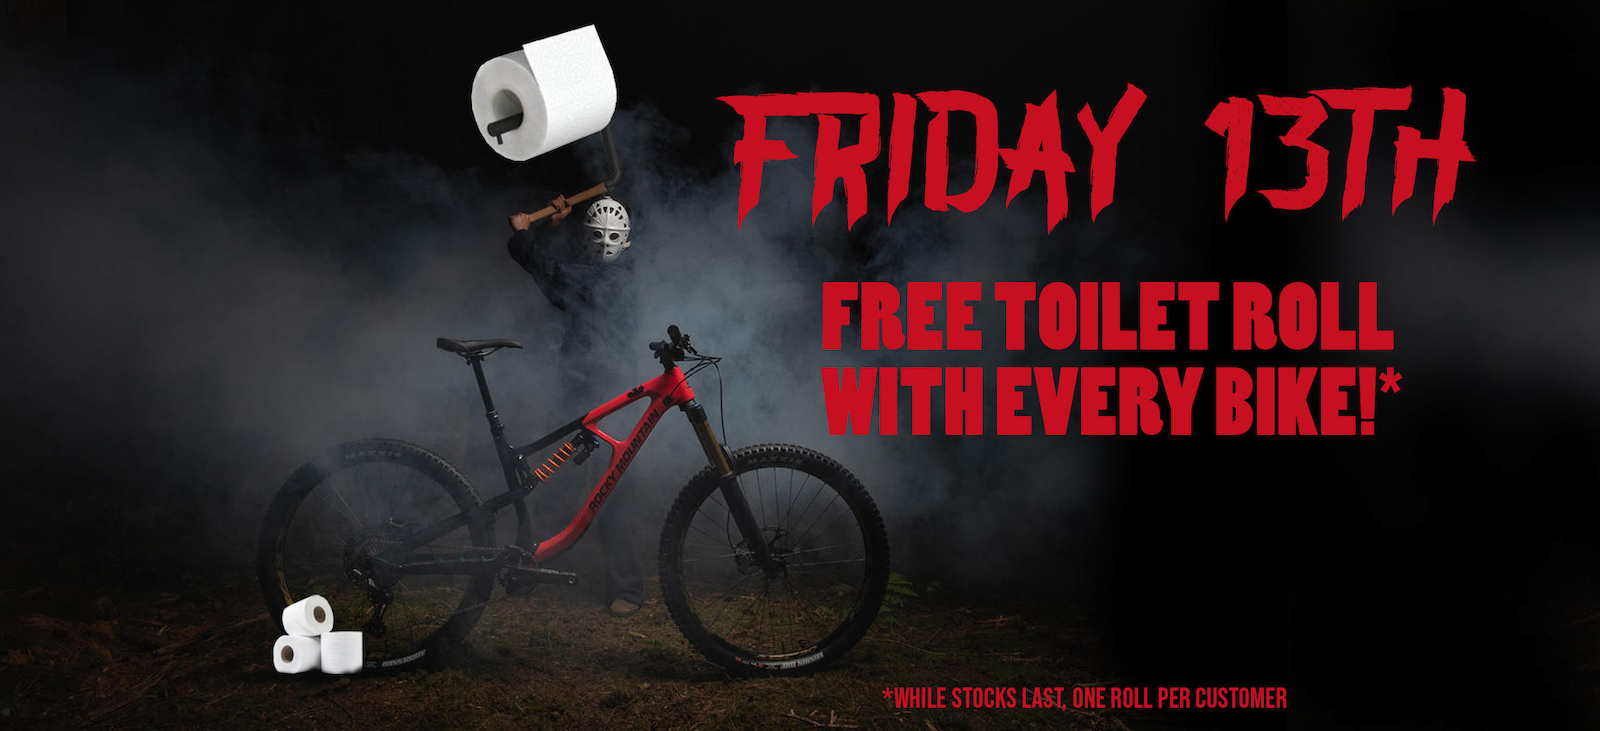 FRIDAY 13th, Free toilet roll with every bike :)